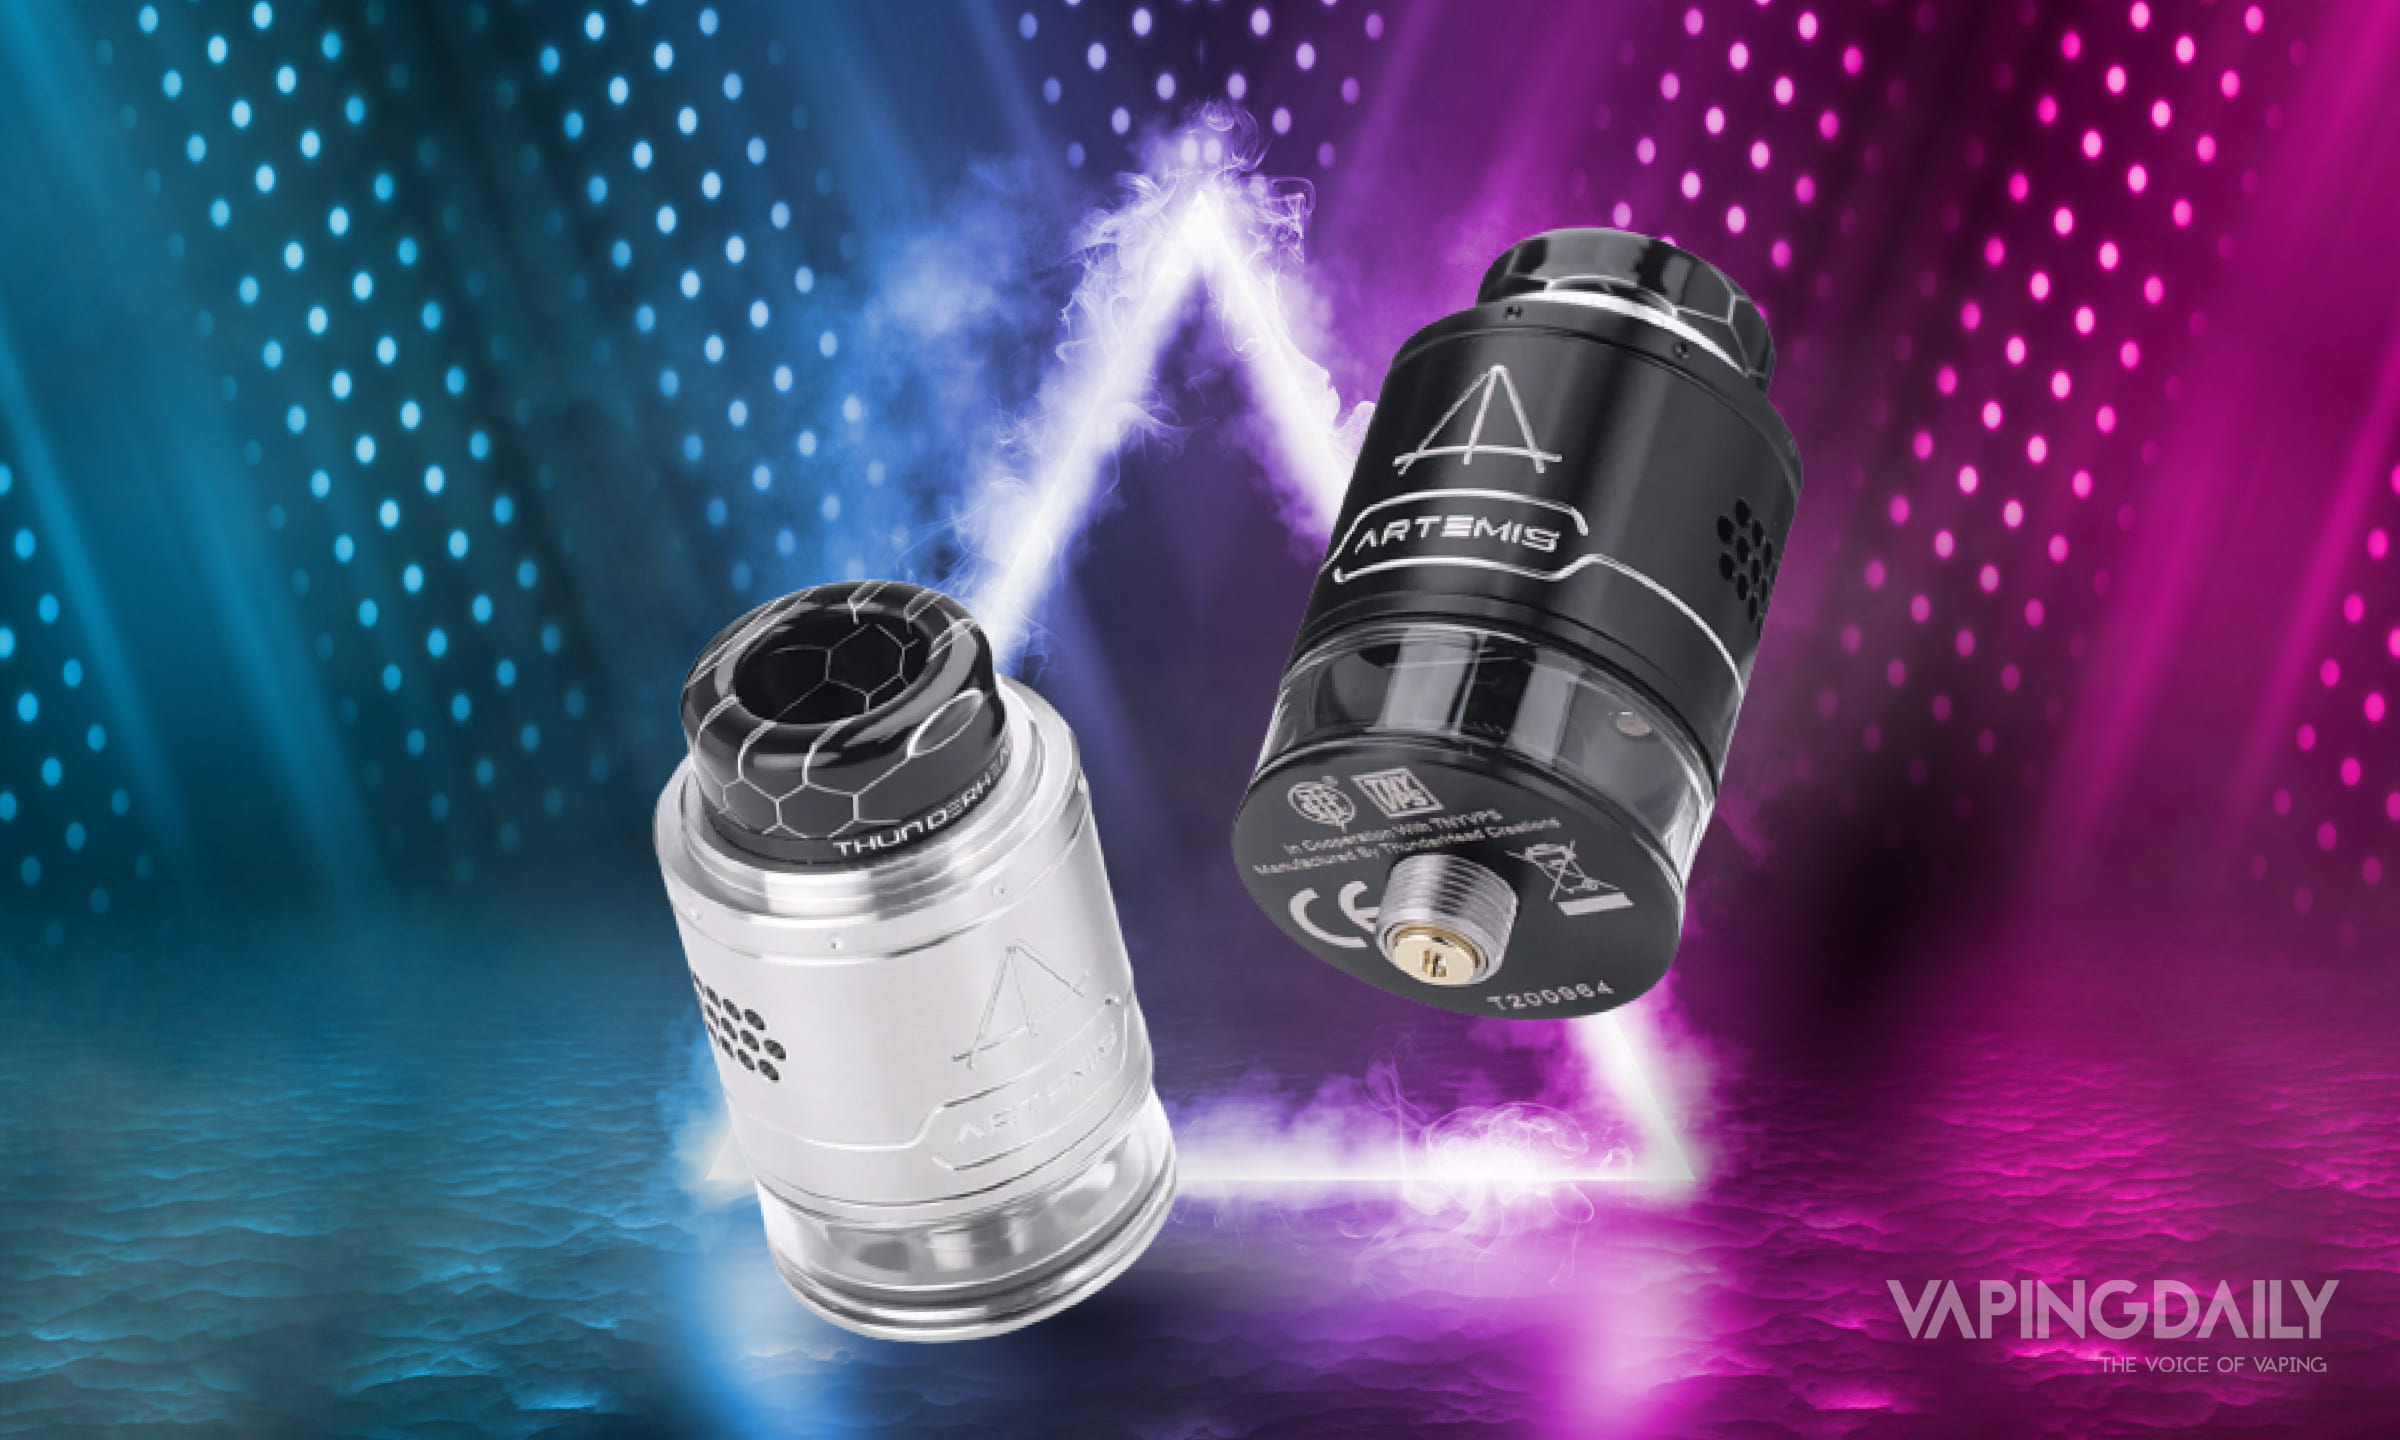 The Thunderhead Artemis RDTA V1.5: The New and Improved Version